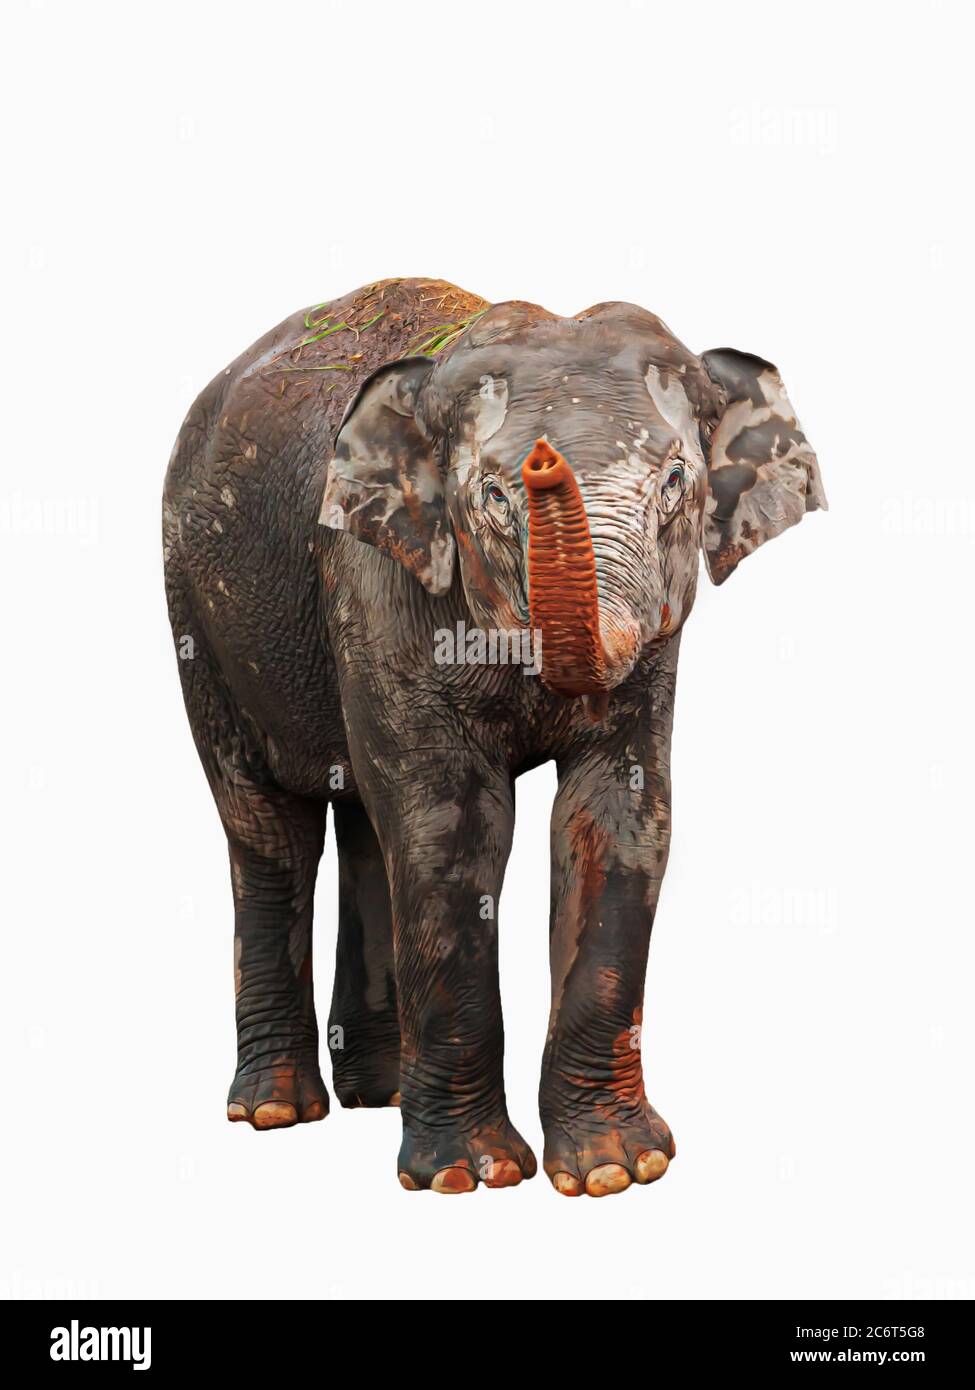 Happy Asian Elephant calf at a natural salt lick on a rainy day, isolated on white background with clipping path. Stock Photo